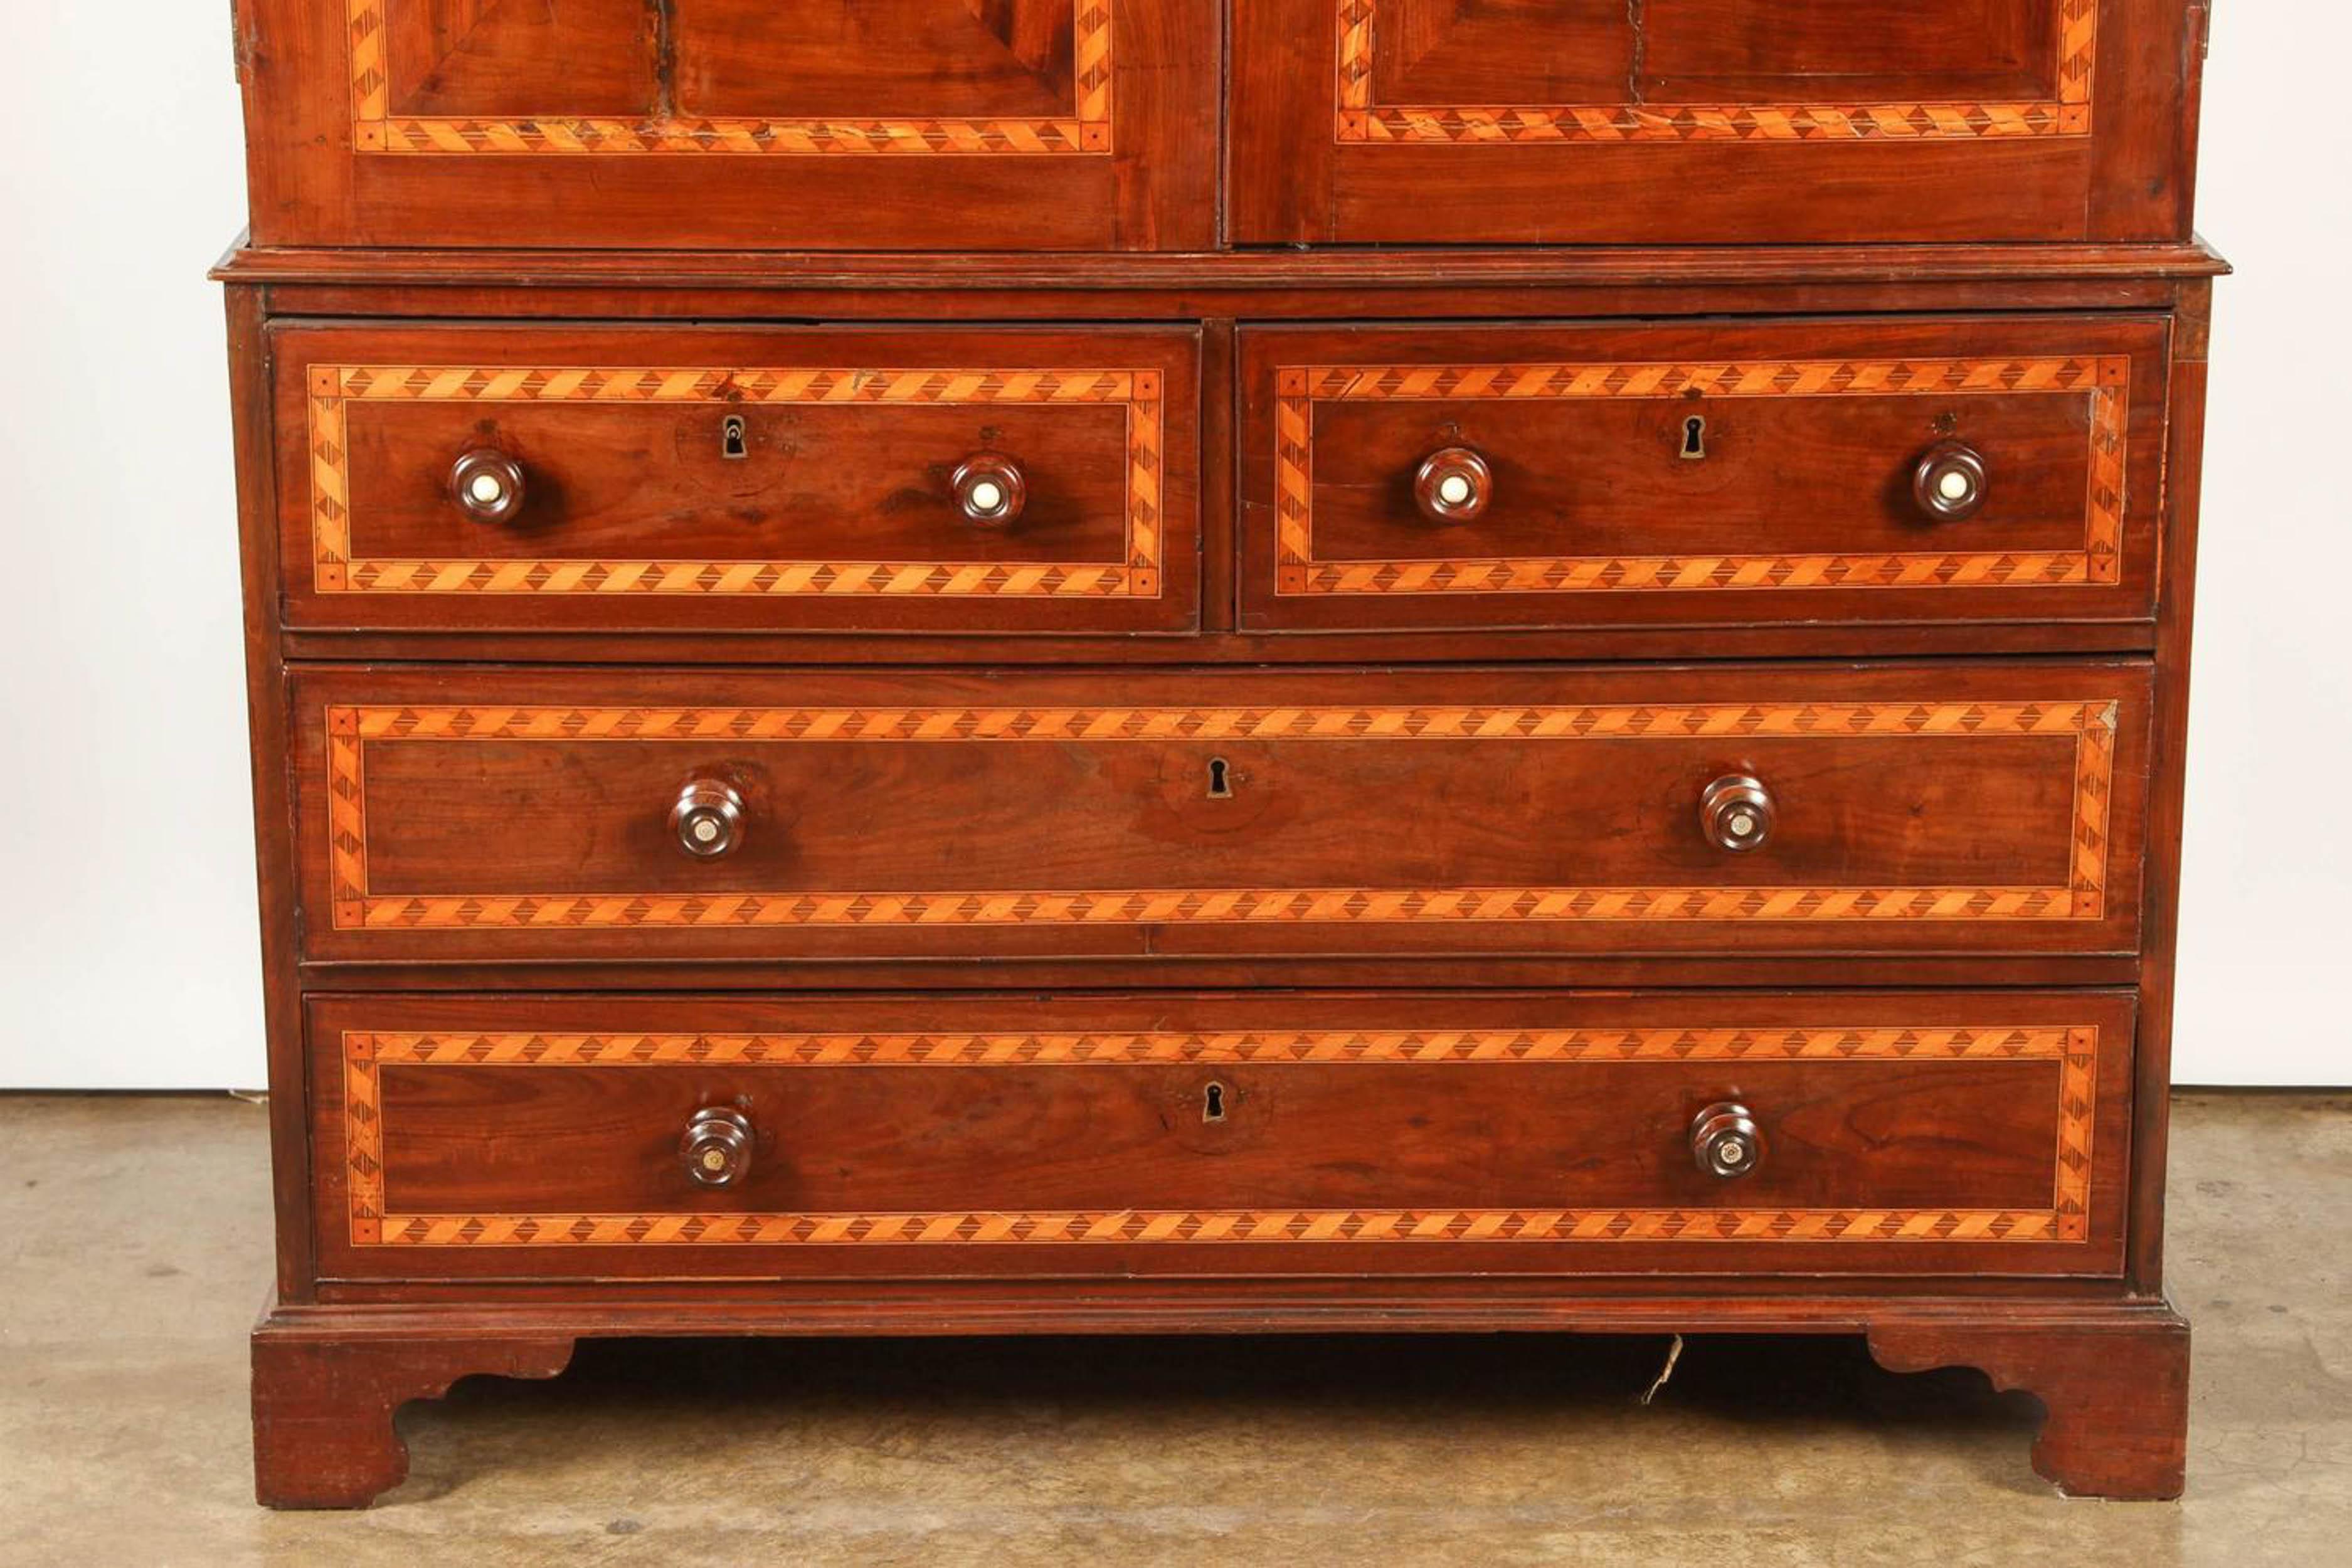 Likely from Peru, this South American cabinet is made of mahogany, with bookmatched front doors opening to reveal a single open space without shelves above 2 short and 2 long drawers, inlaid through with banding. In the English manner for the local